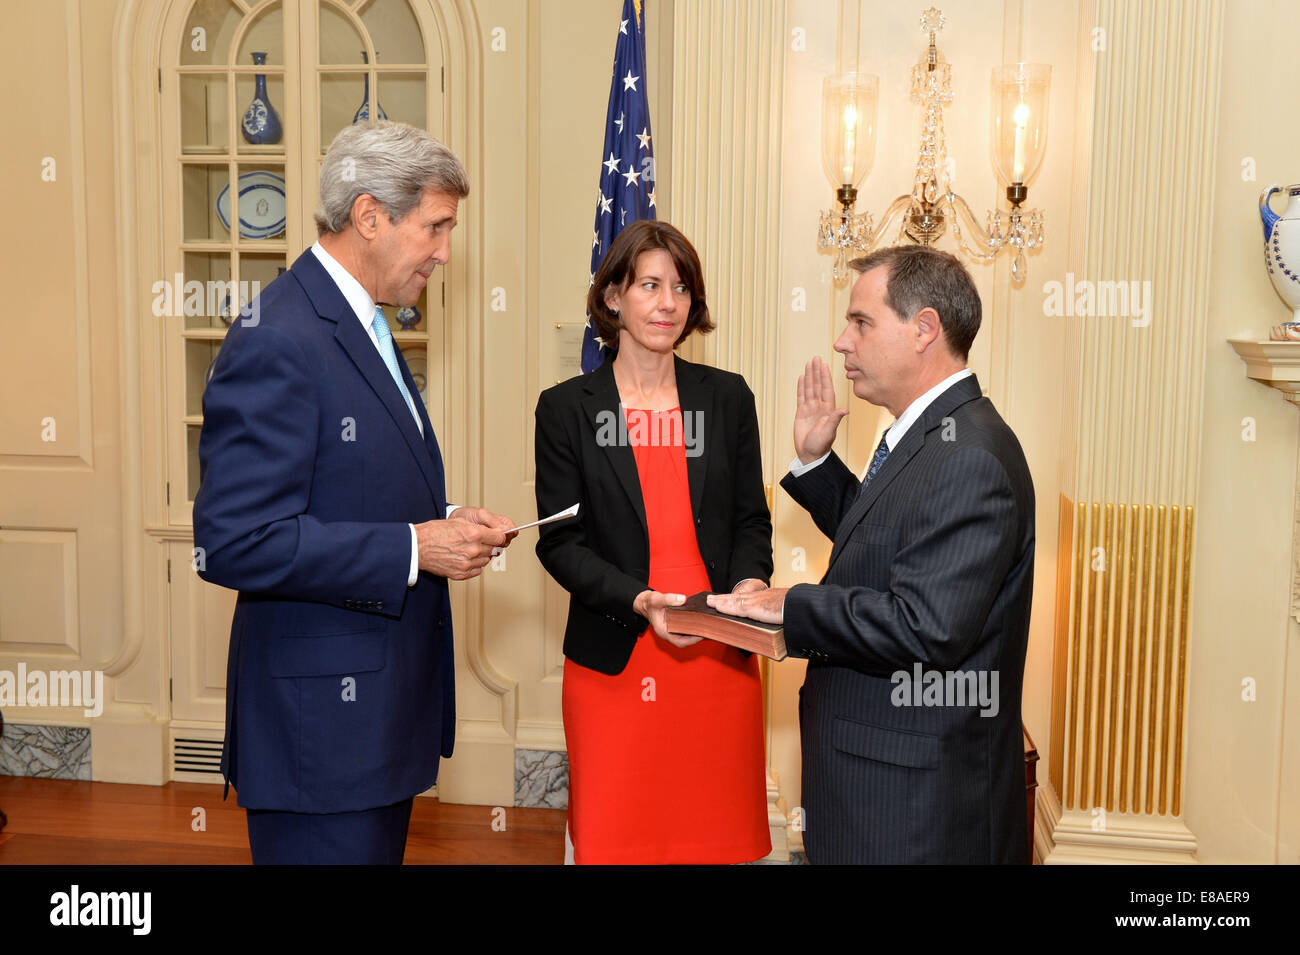 U.S. Secretary of State John Kerry swears in Stuart Jones as the U.S. Ambassador to Iraq at a ceremony at the U.S. Department of State in Washington, D.C., on September 17, 2014. Stock Photo